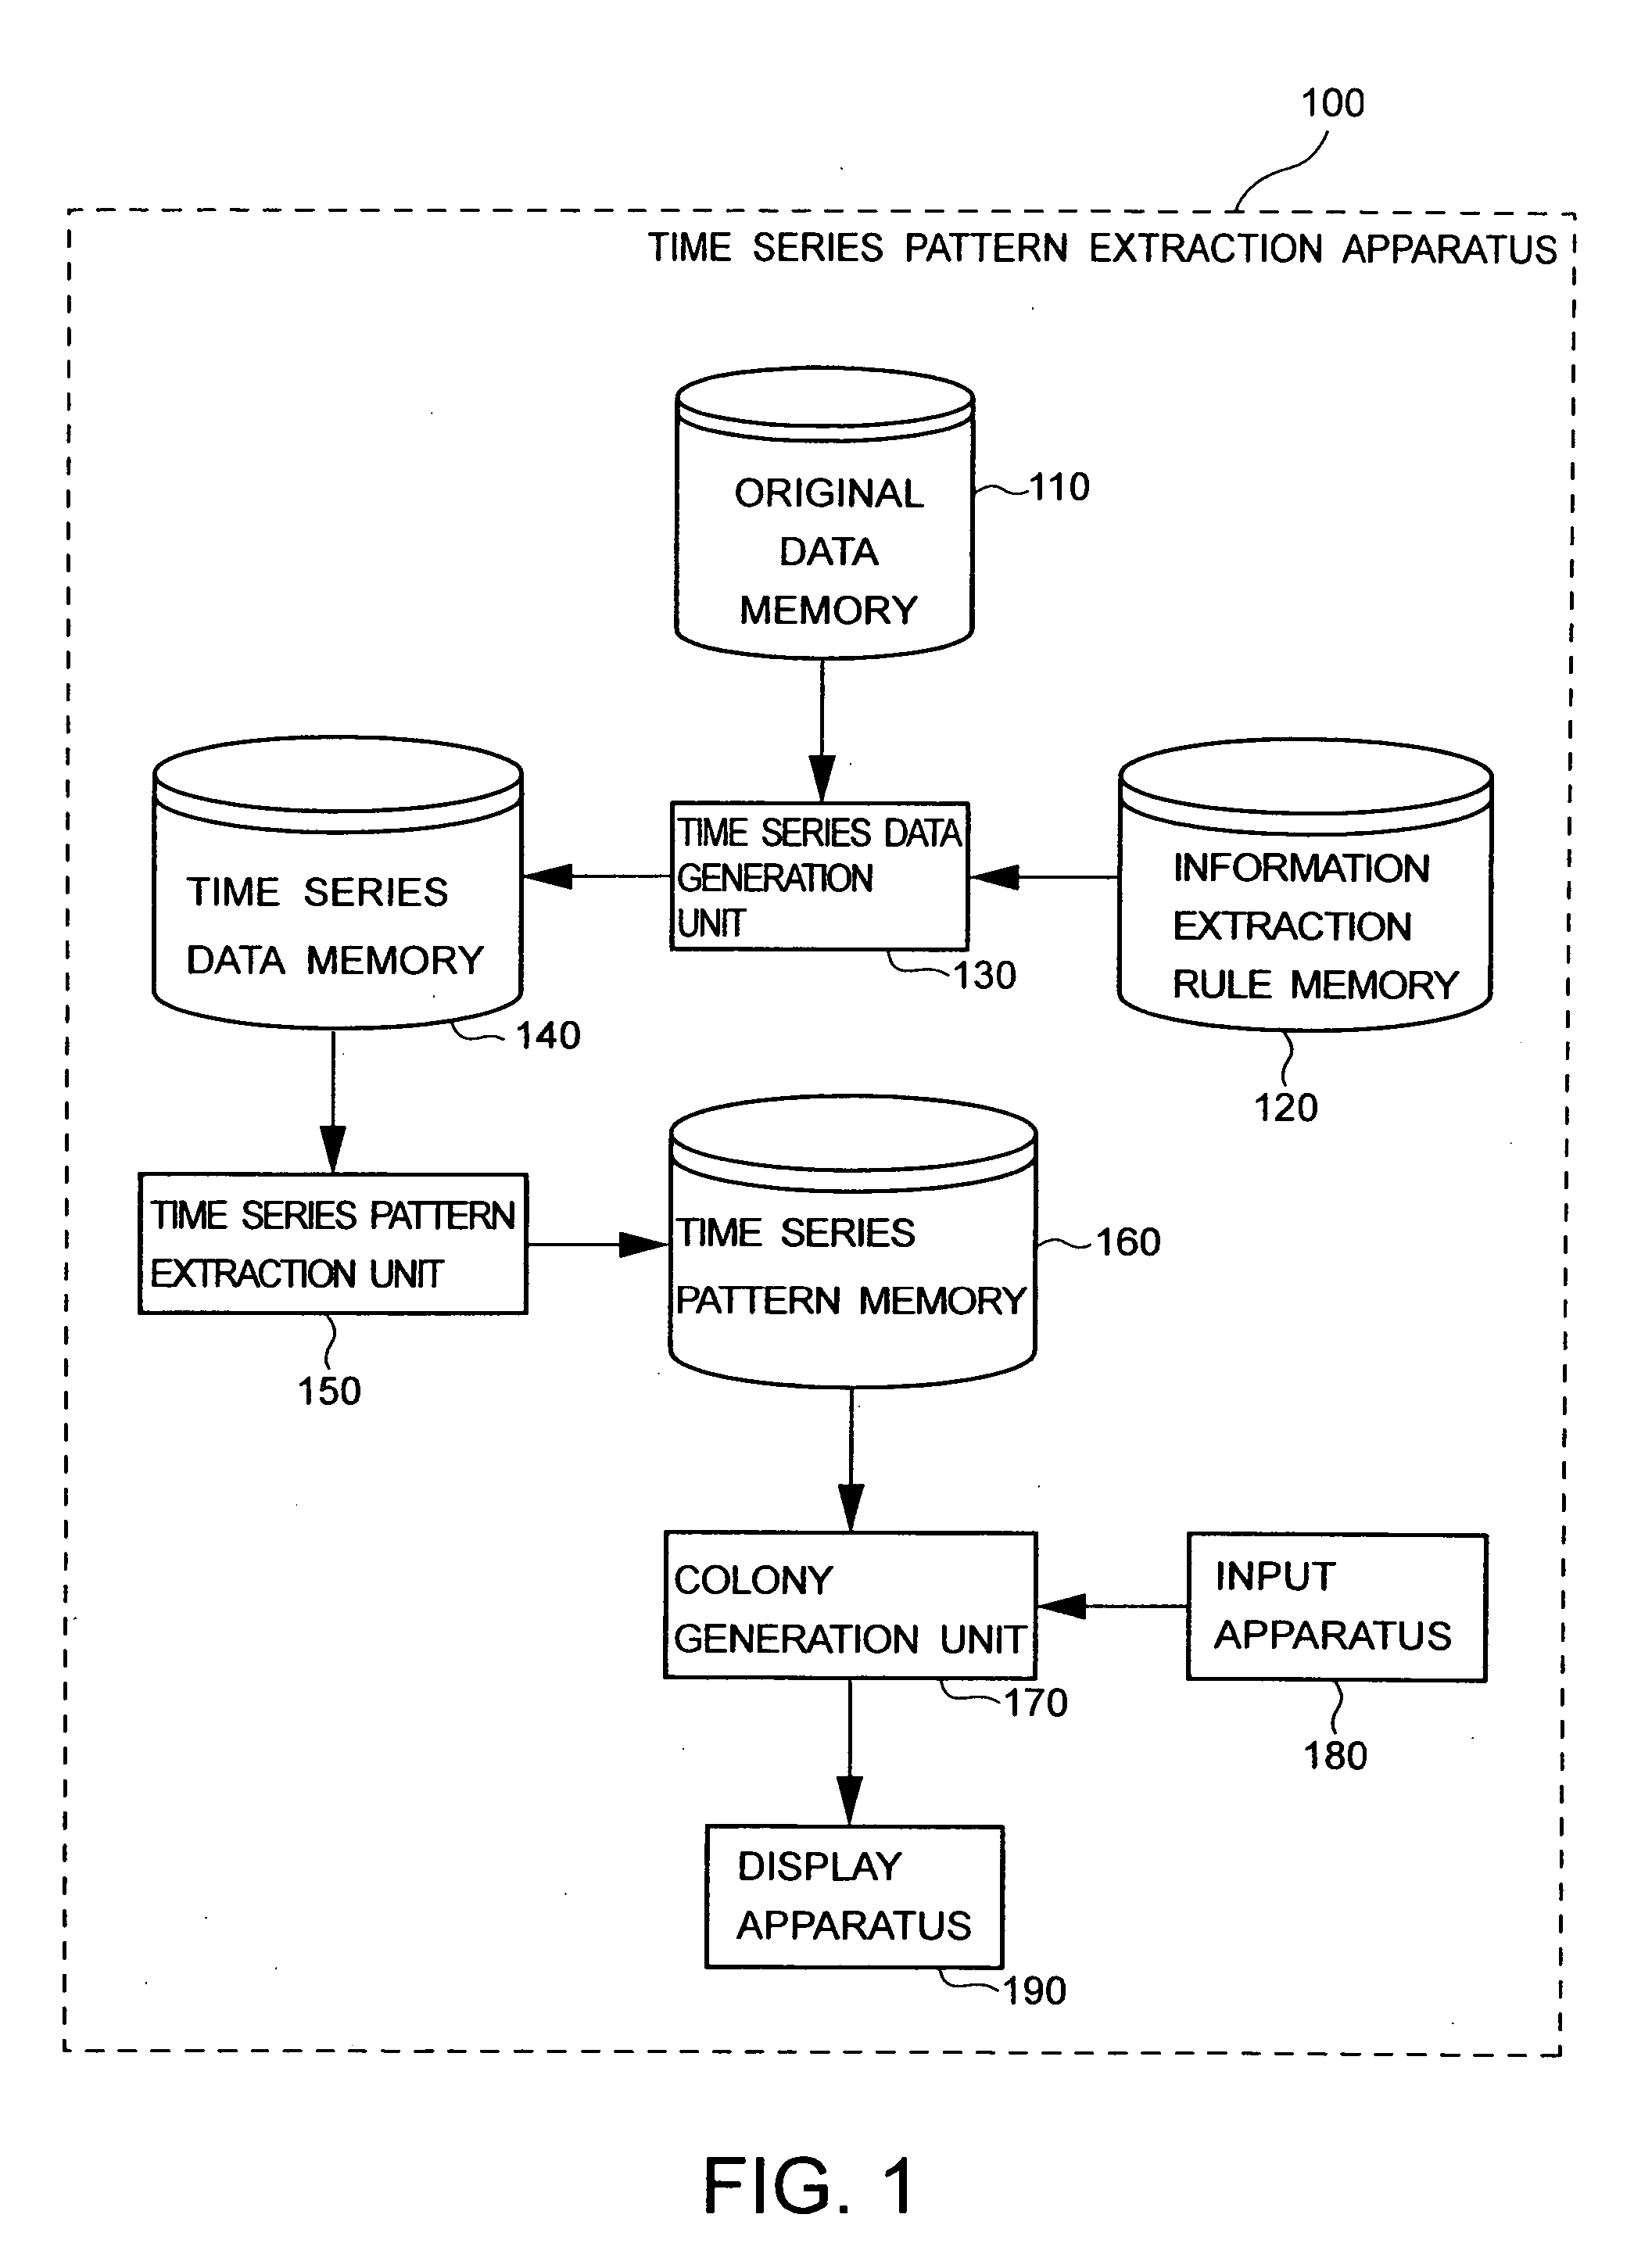 Time series pattern extraction apparatus and method